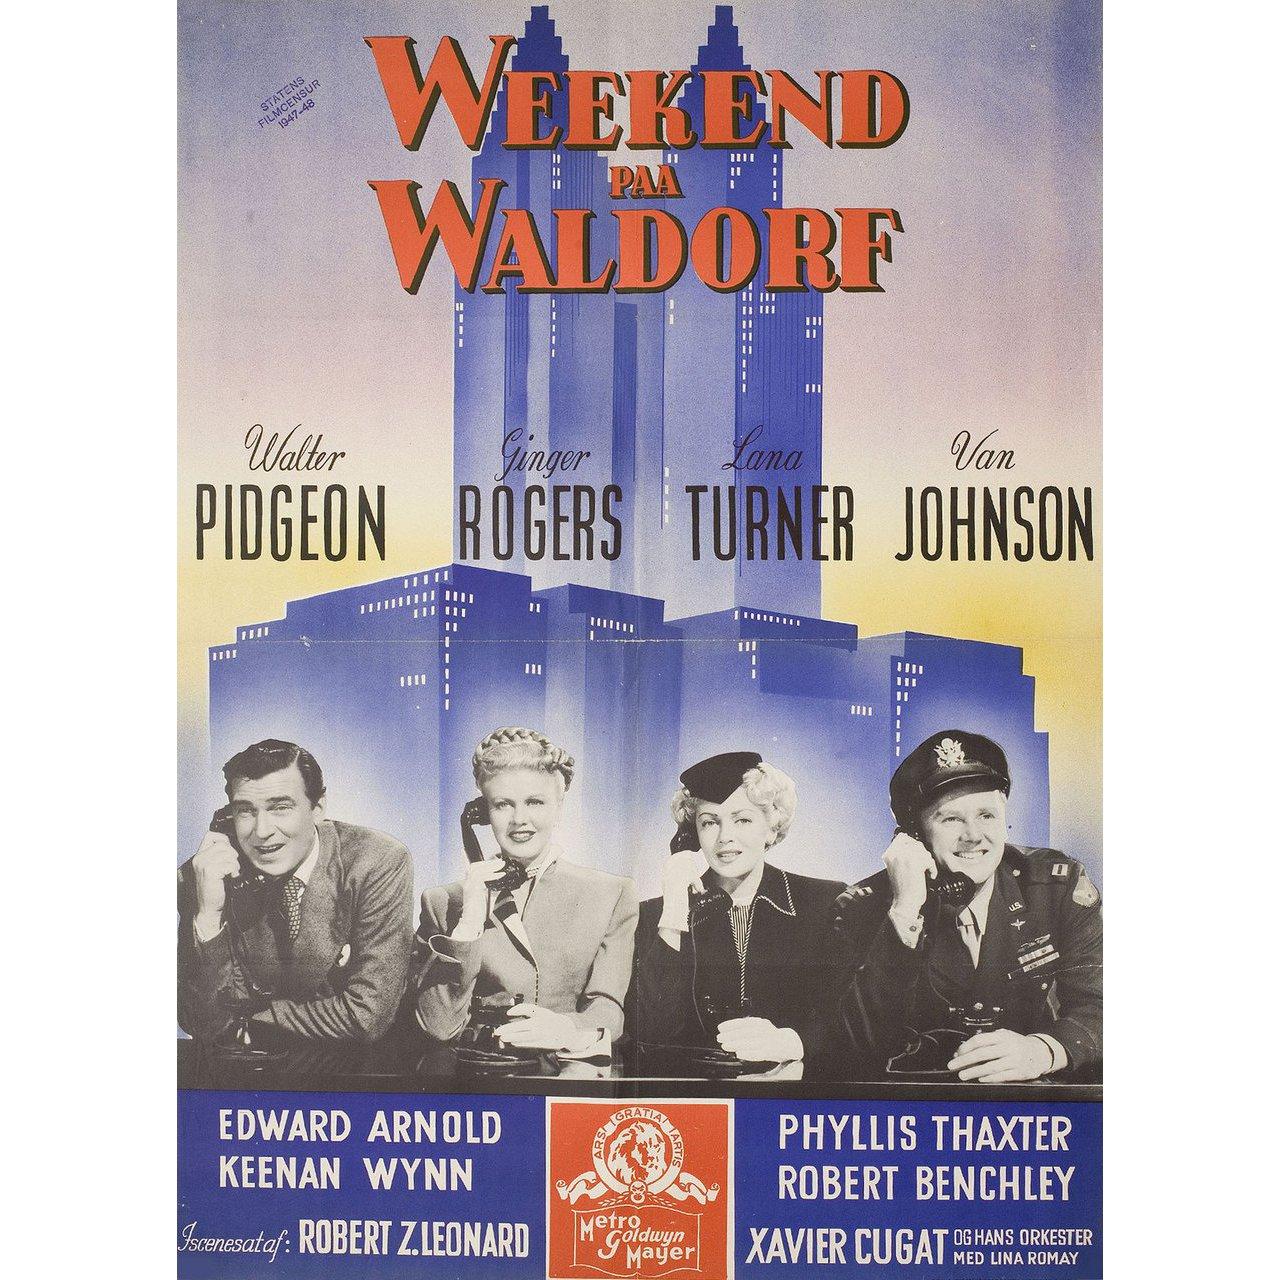 Original 1947 Danish A1 poster for the film Week-End at the Waldorf directed by Robert Z. Leonard with Ginger Rogers/Lana Turner/Walter Pidgeon/Van Johnson. Very good-fine condition, folded. Many original posters were issued folded or were